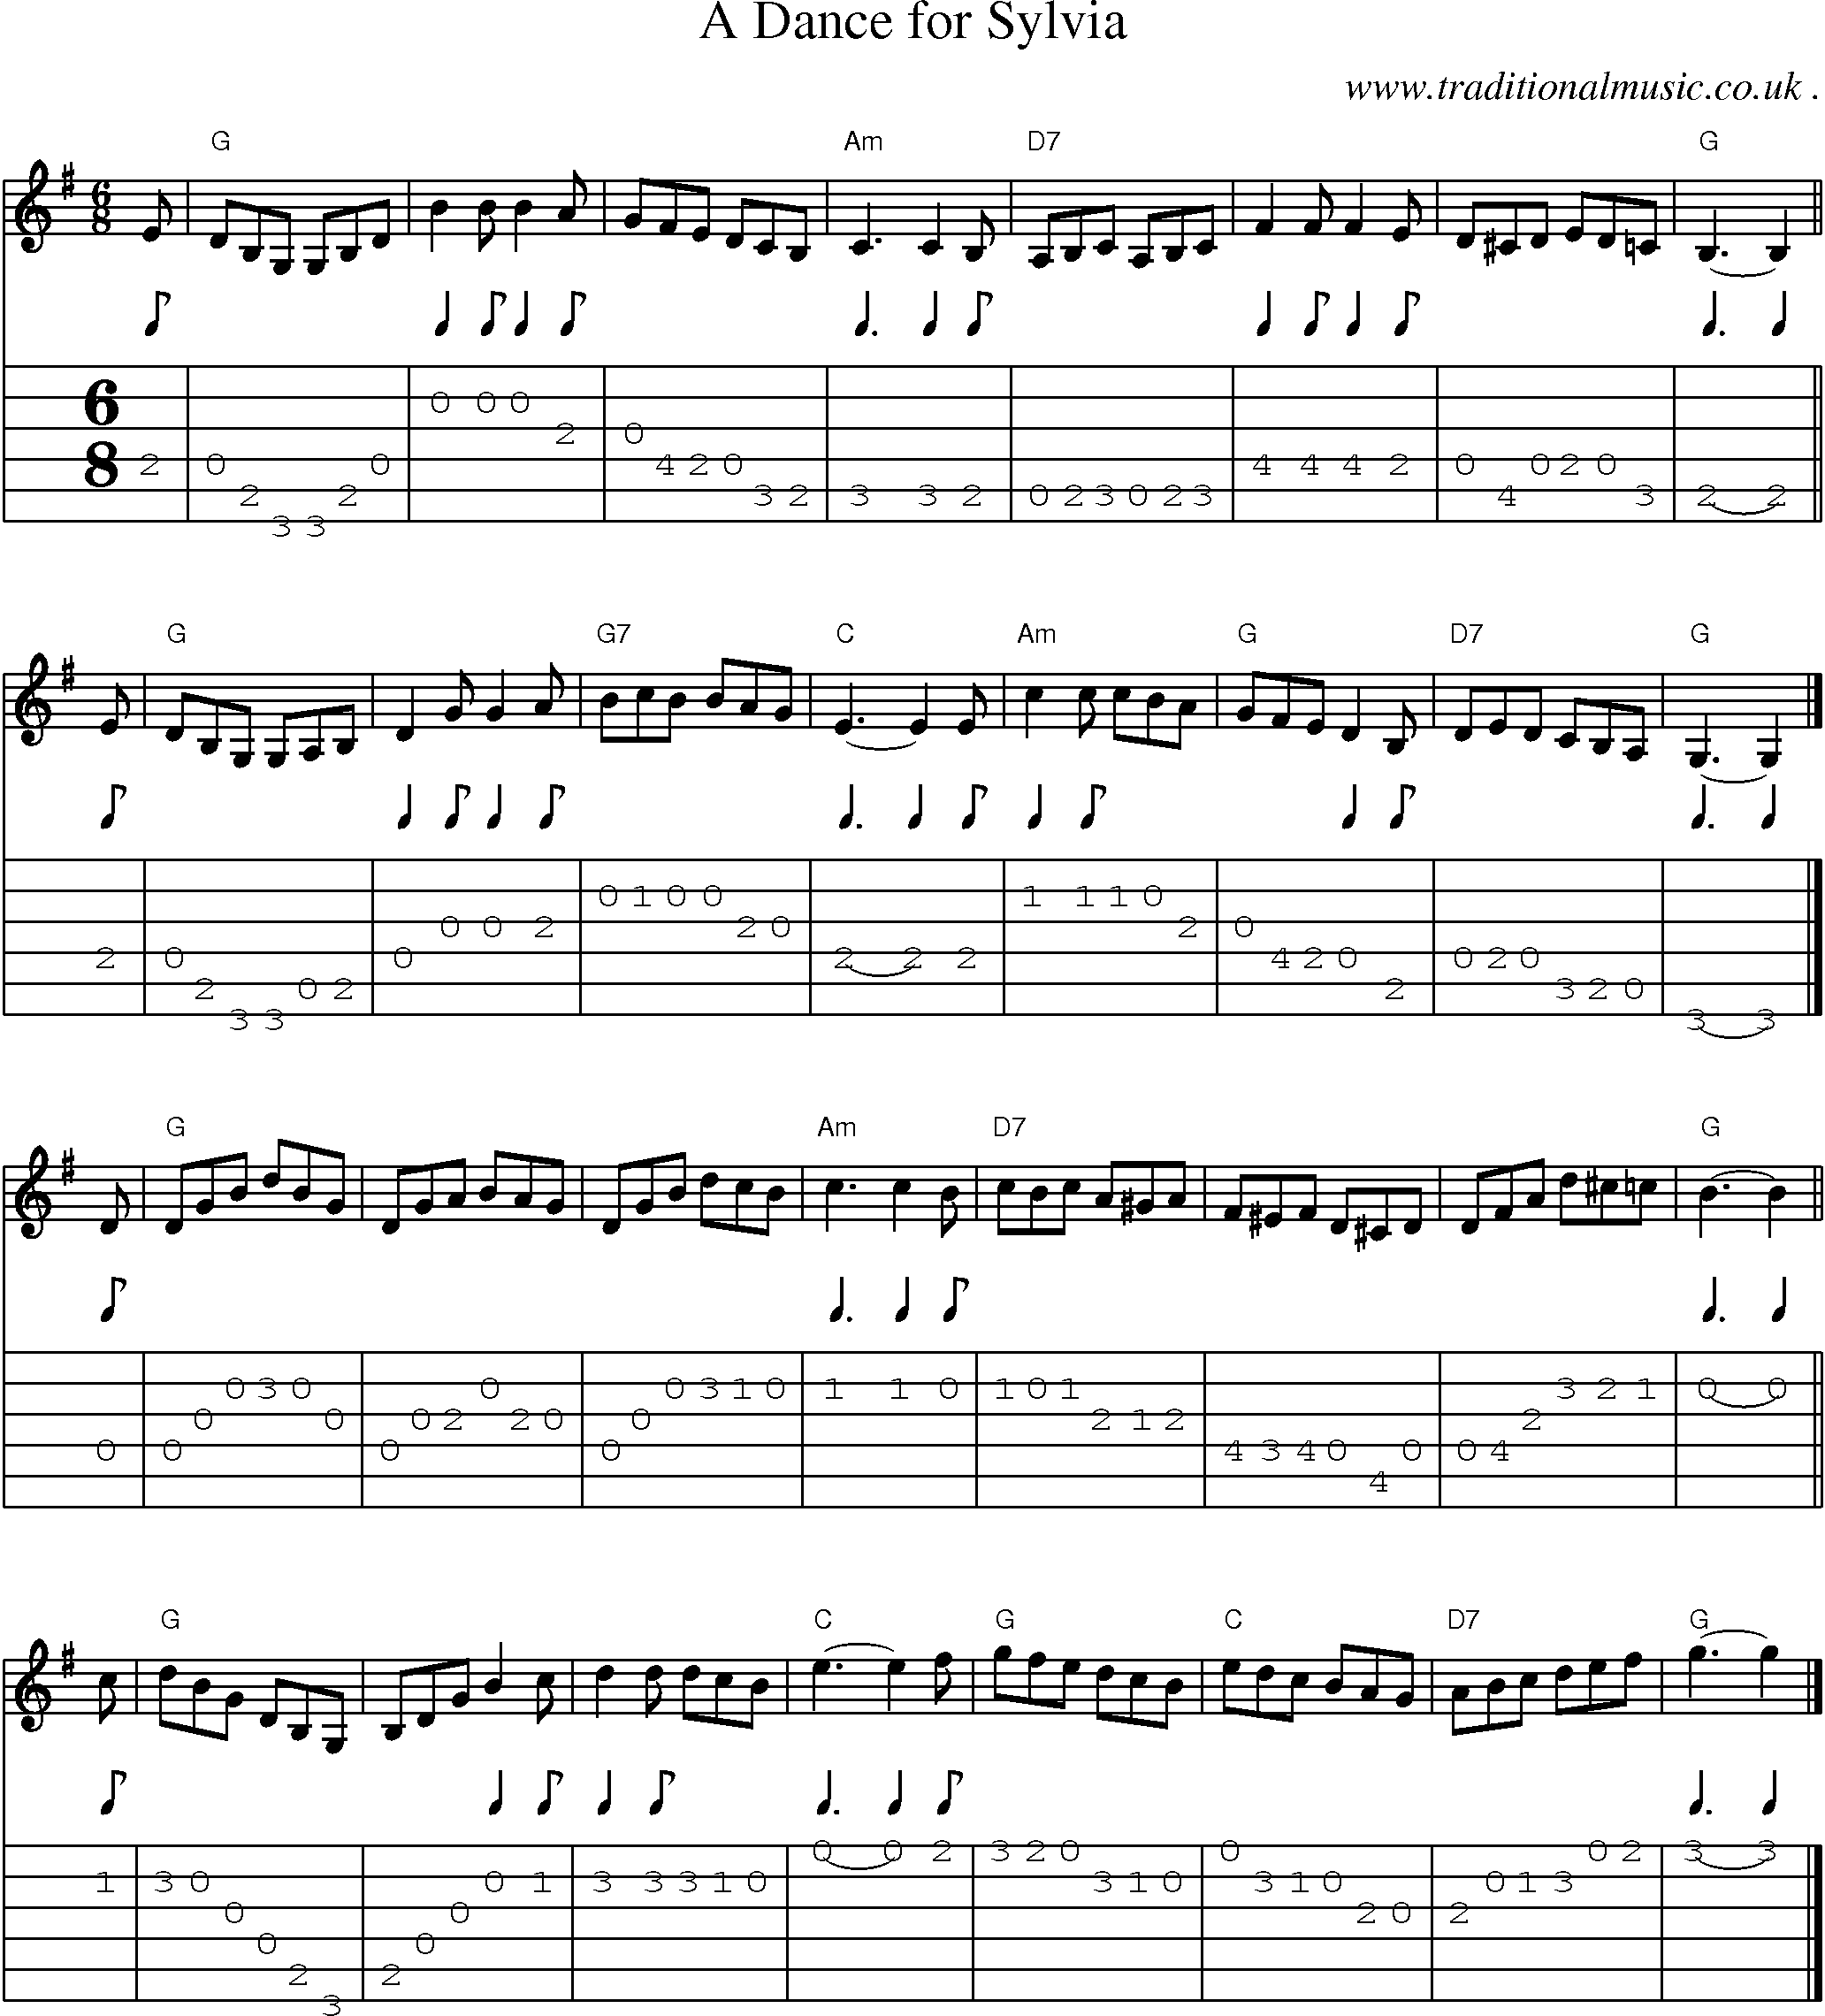 Sheet-music  score, Chords and Guitar Tabs for A Dance For Sylvia